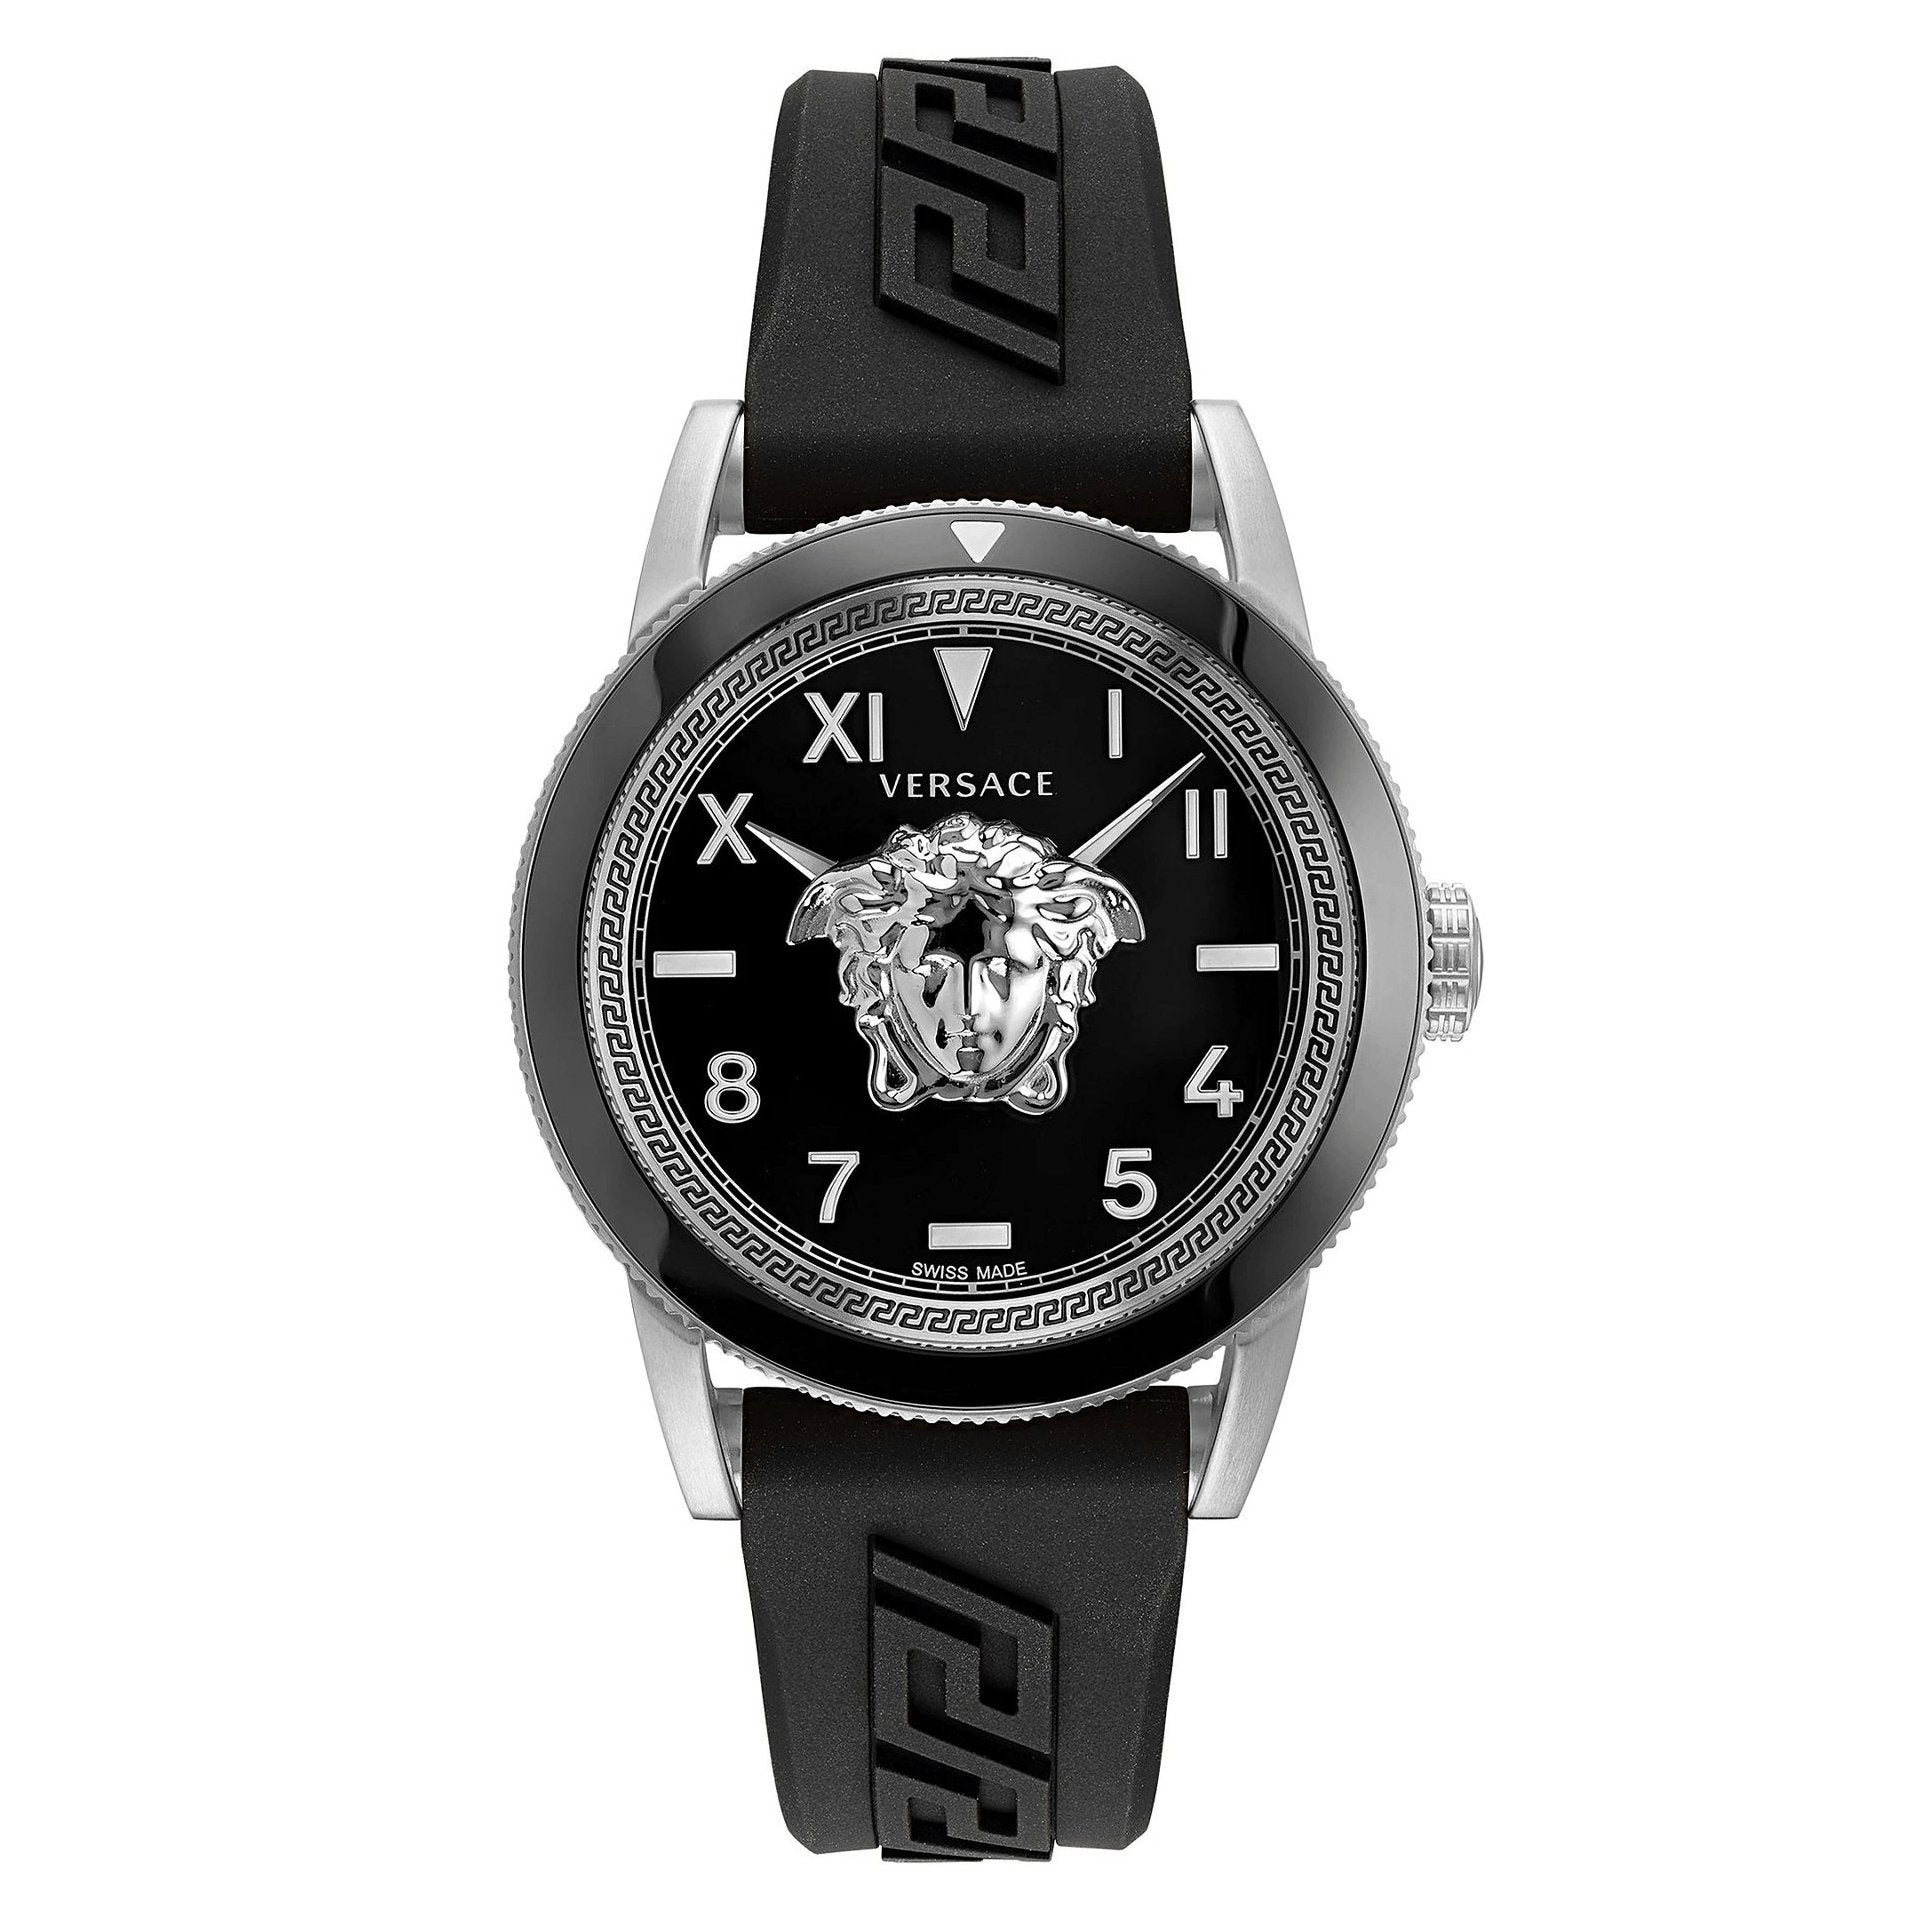 Versace Men's Watch V-Palazzo Black VE2V00122 - Watches & Crystals